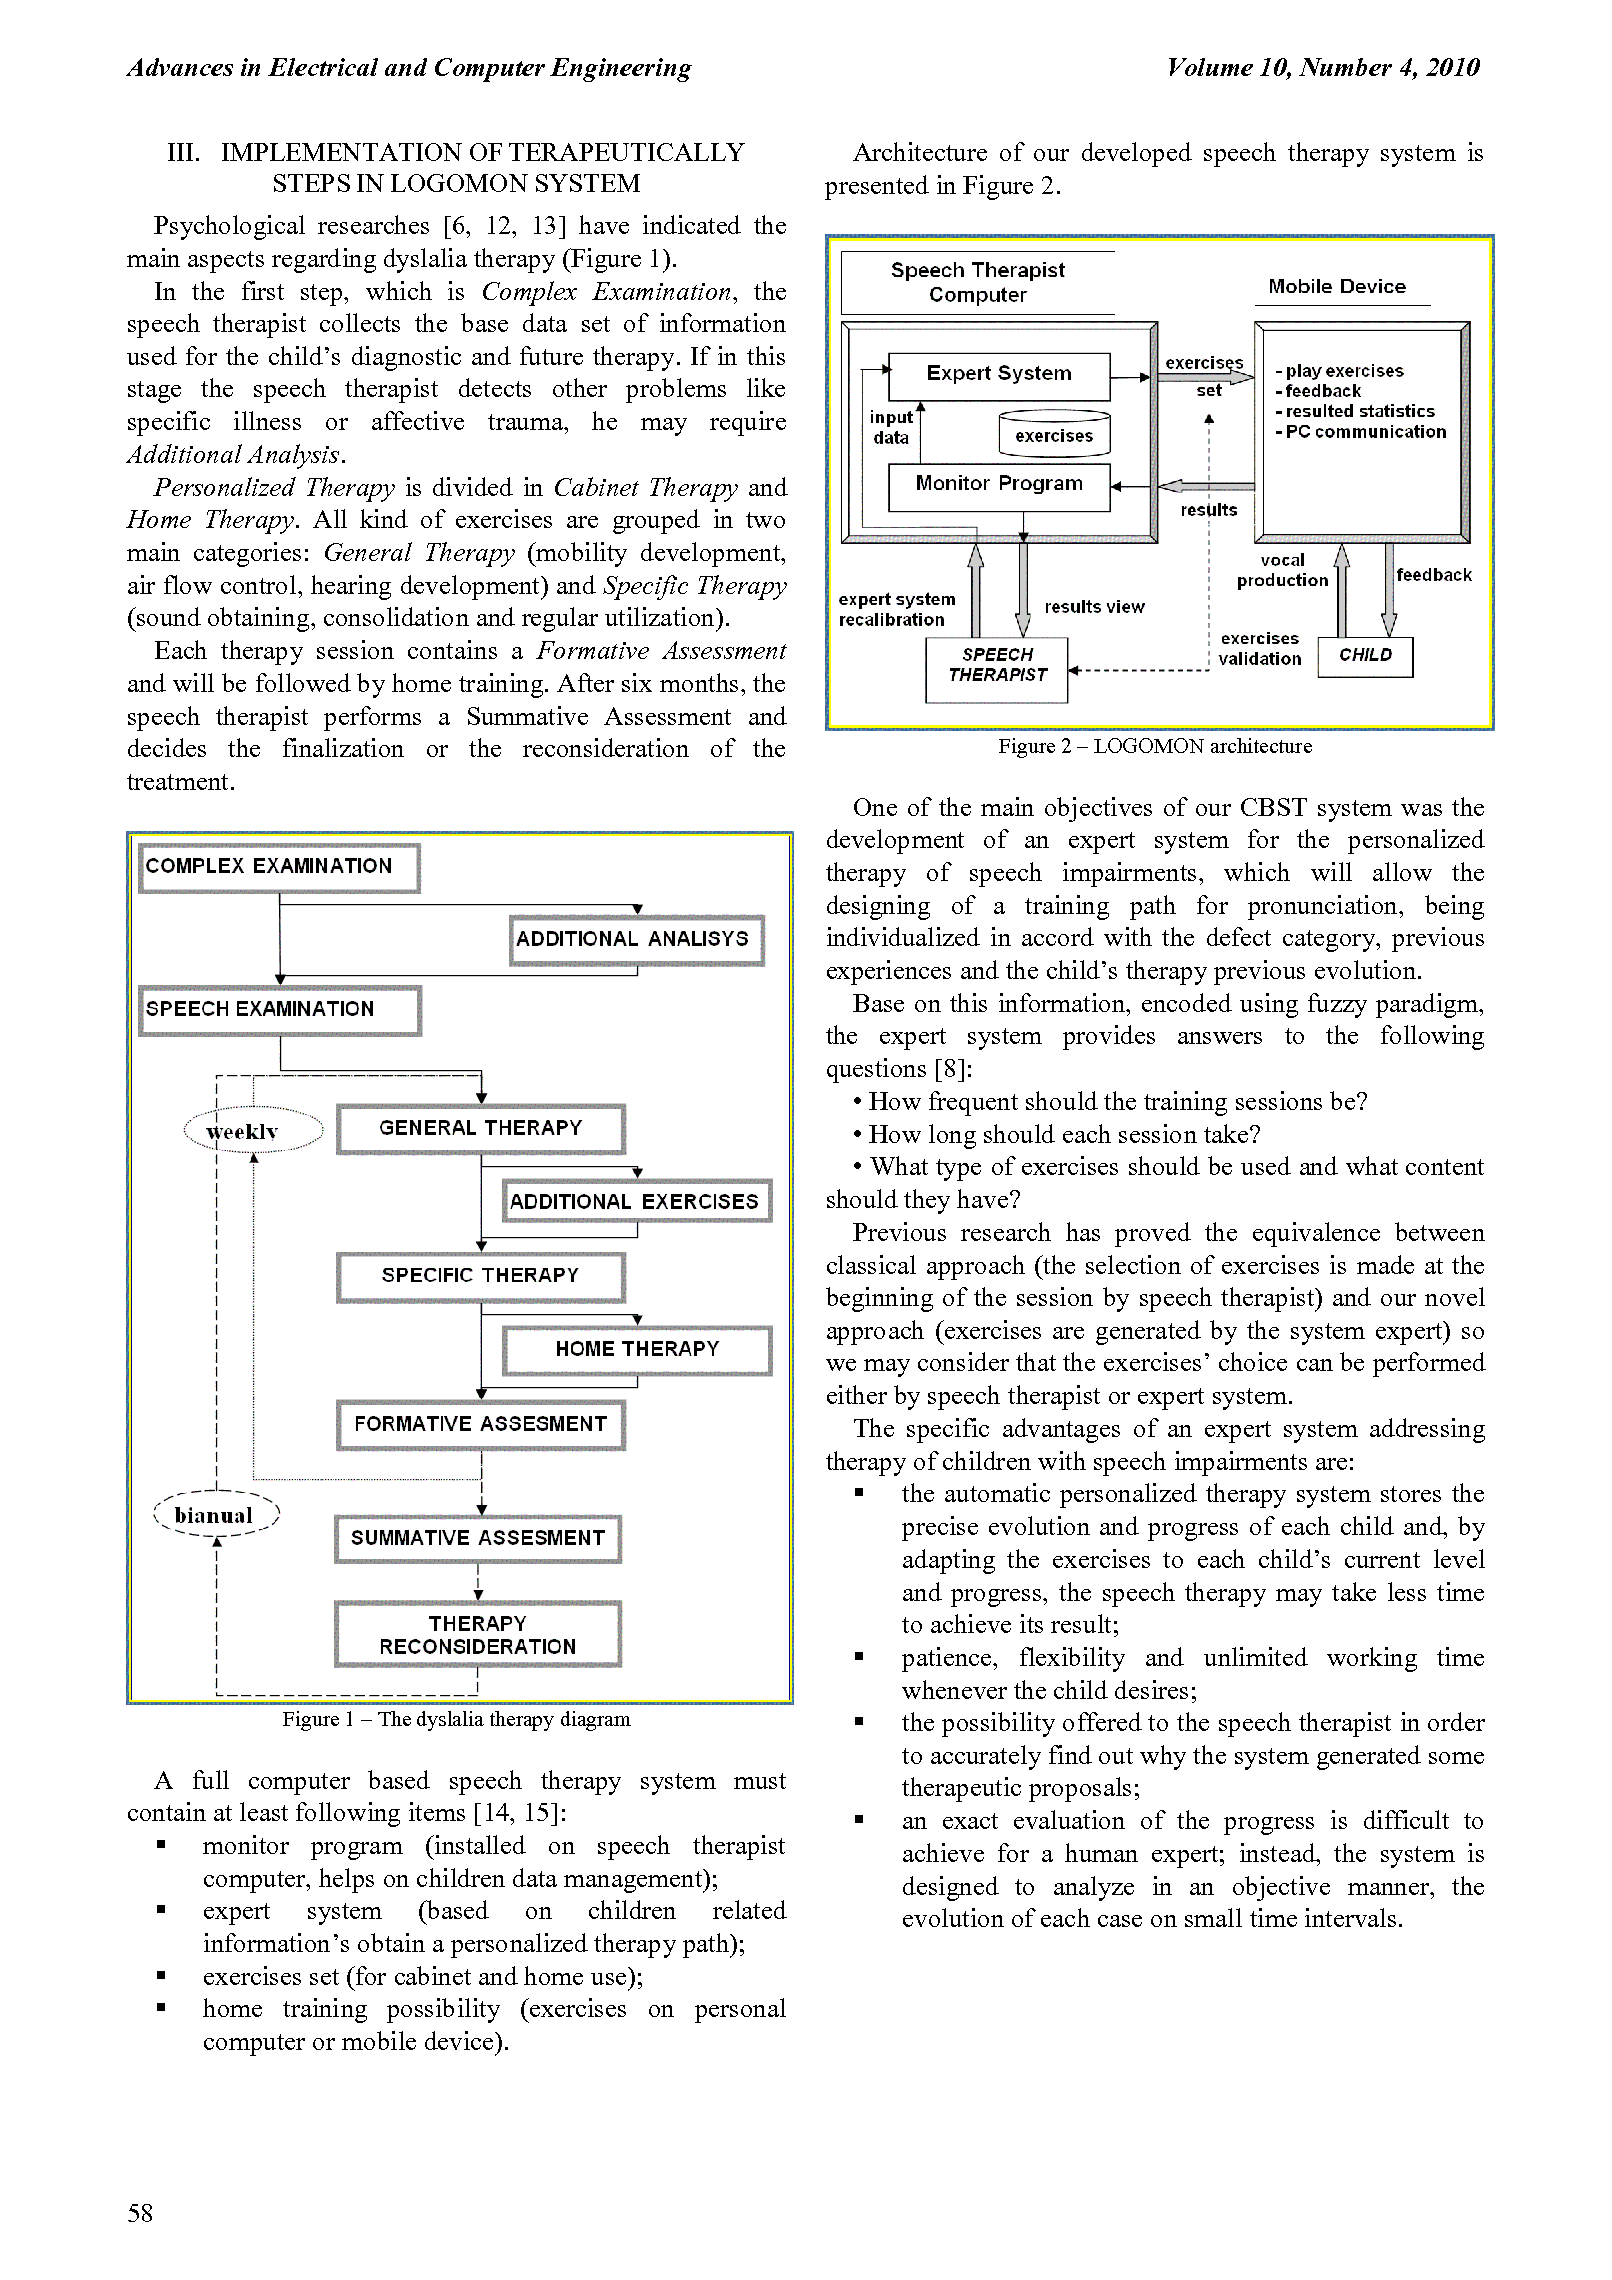 PDF Quickview for paper with DOI:10.4316/AECE.2010.04009